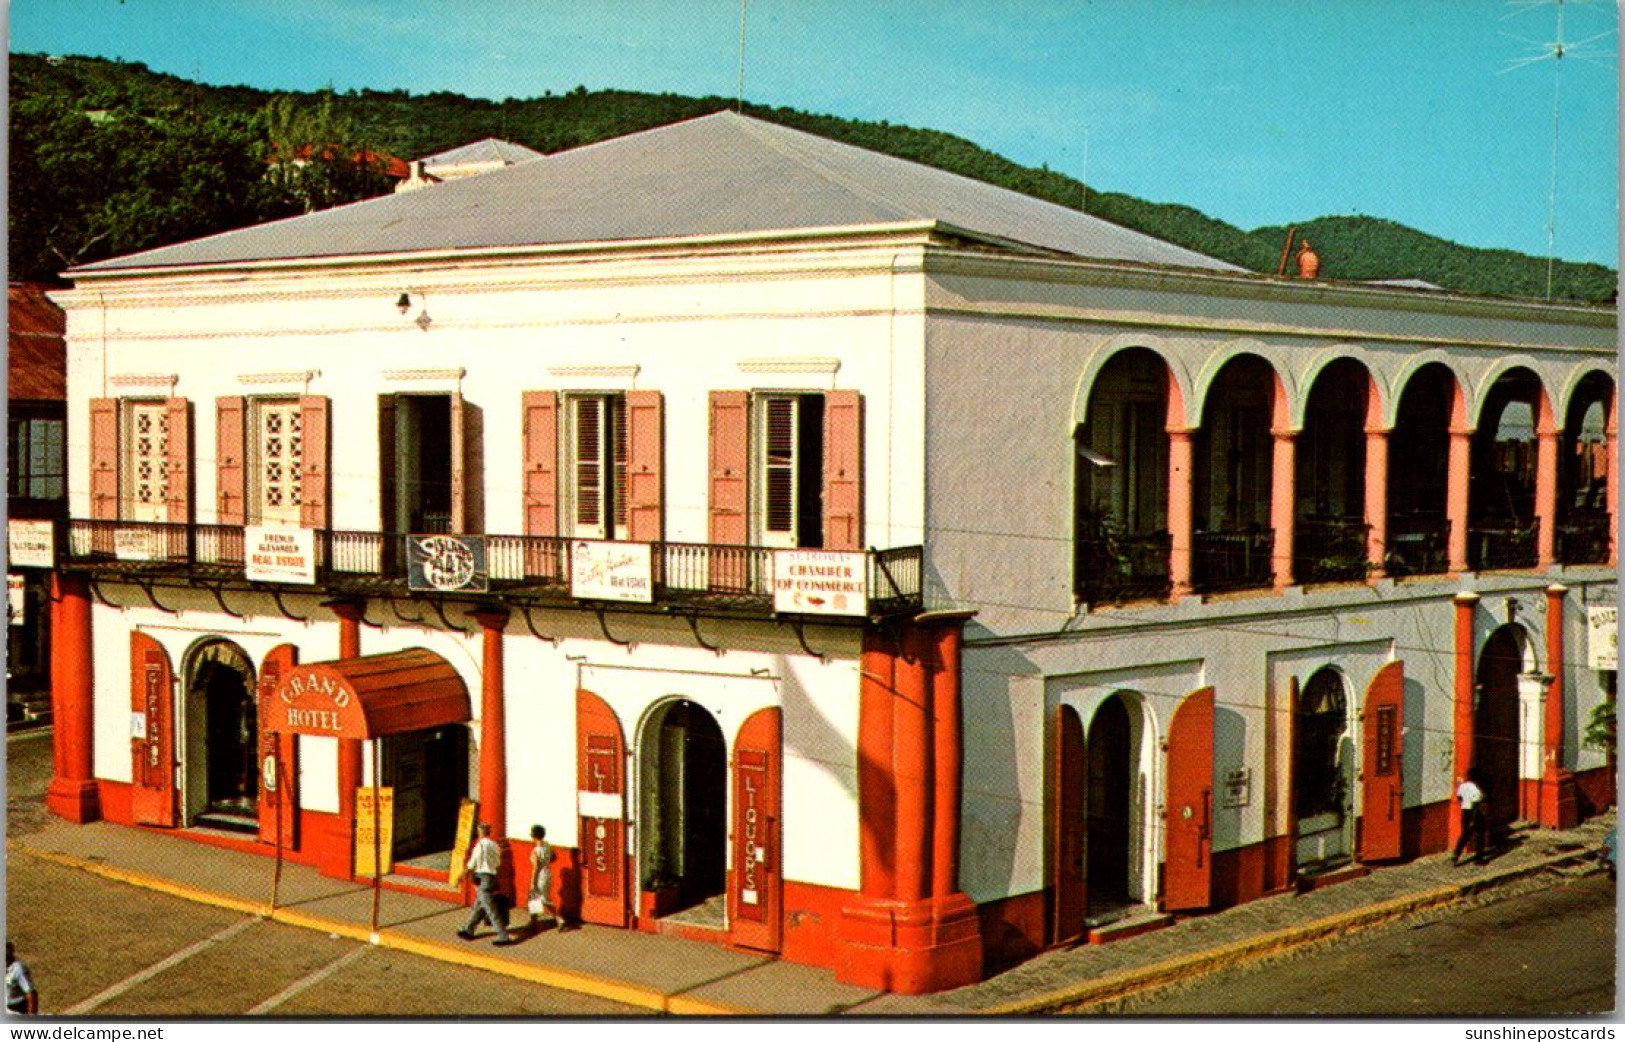 St Thomas Charlotte Amalie The Grand Hotel Opened In May 1841 - Virgin Islands, US